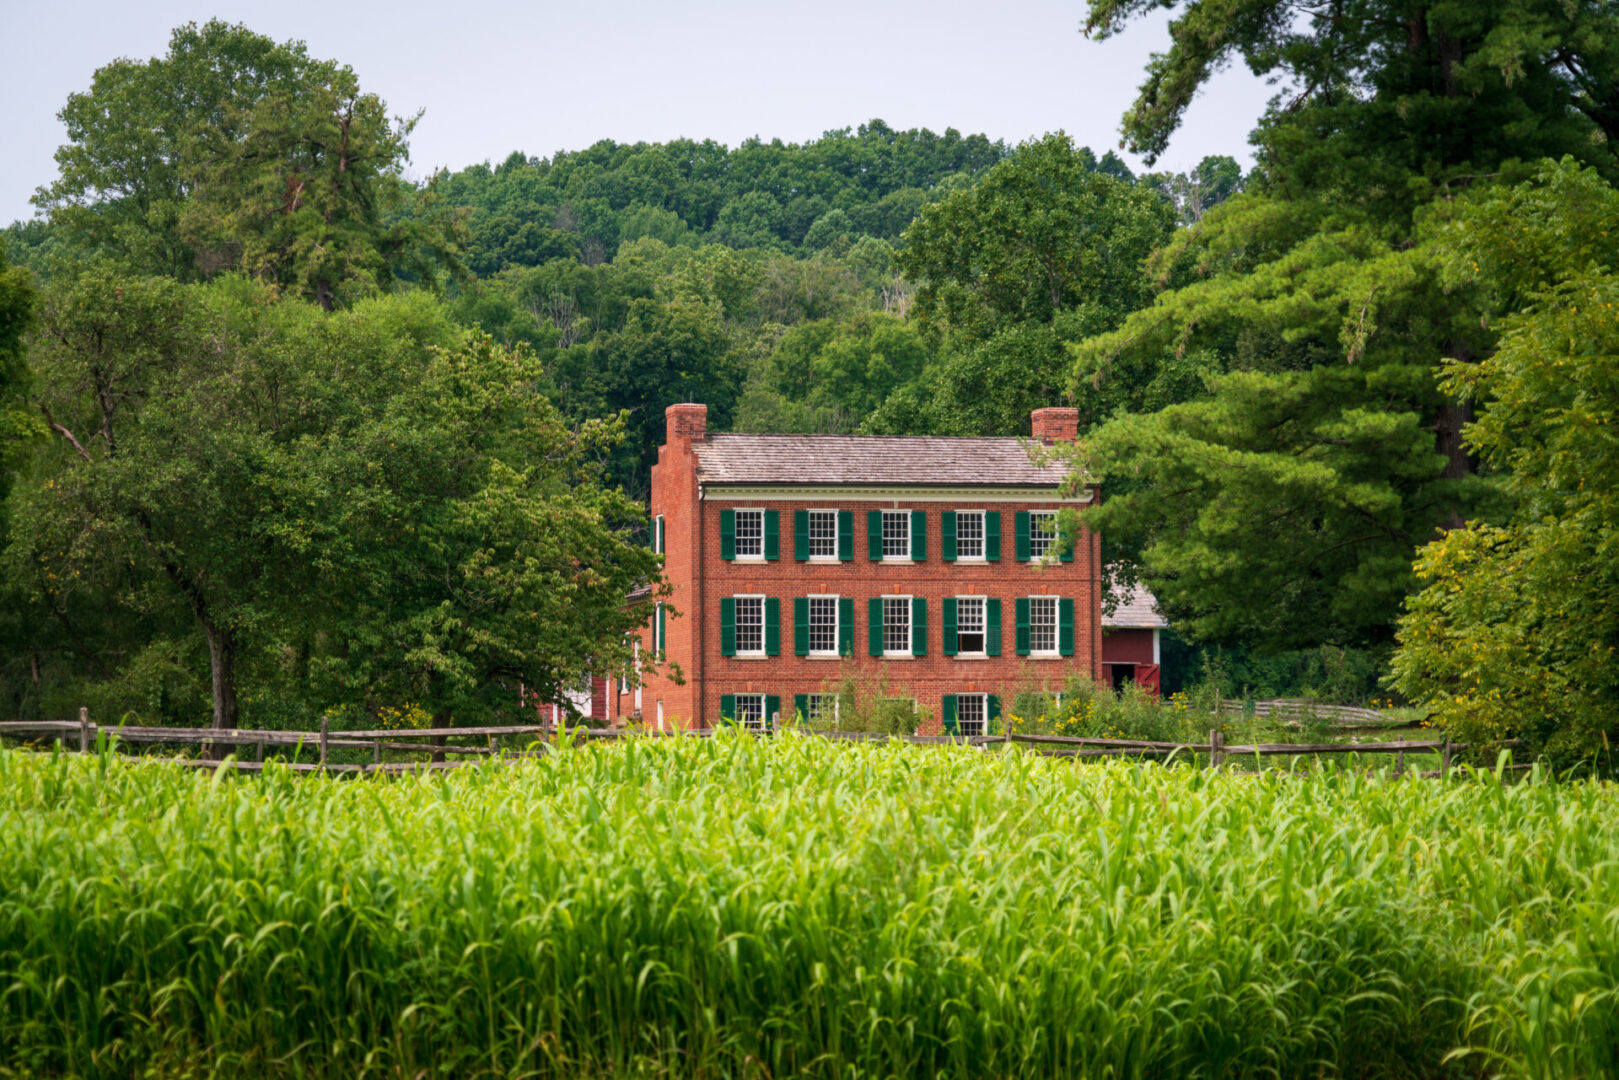 A brick house with green shutters in the middle of a field.